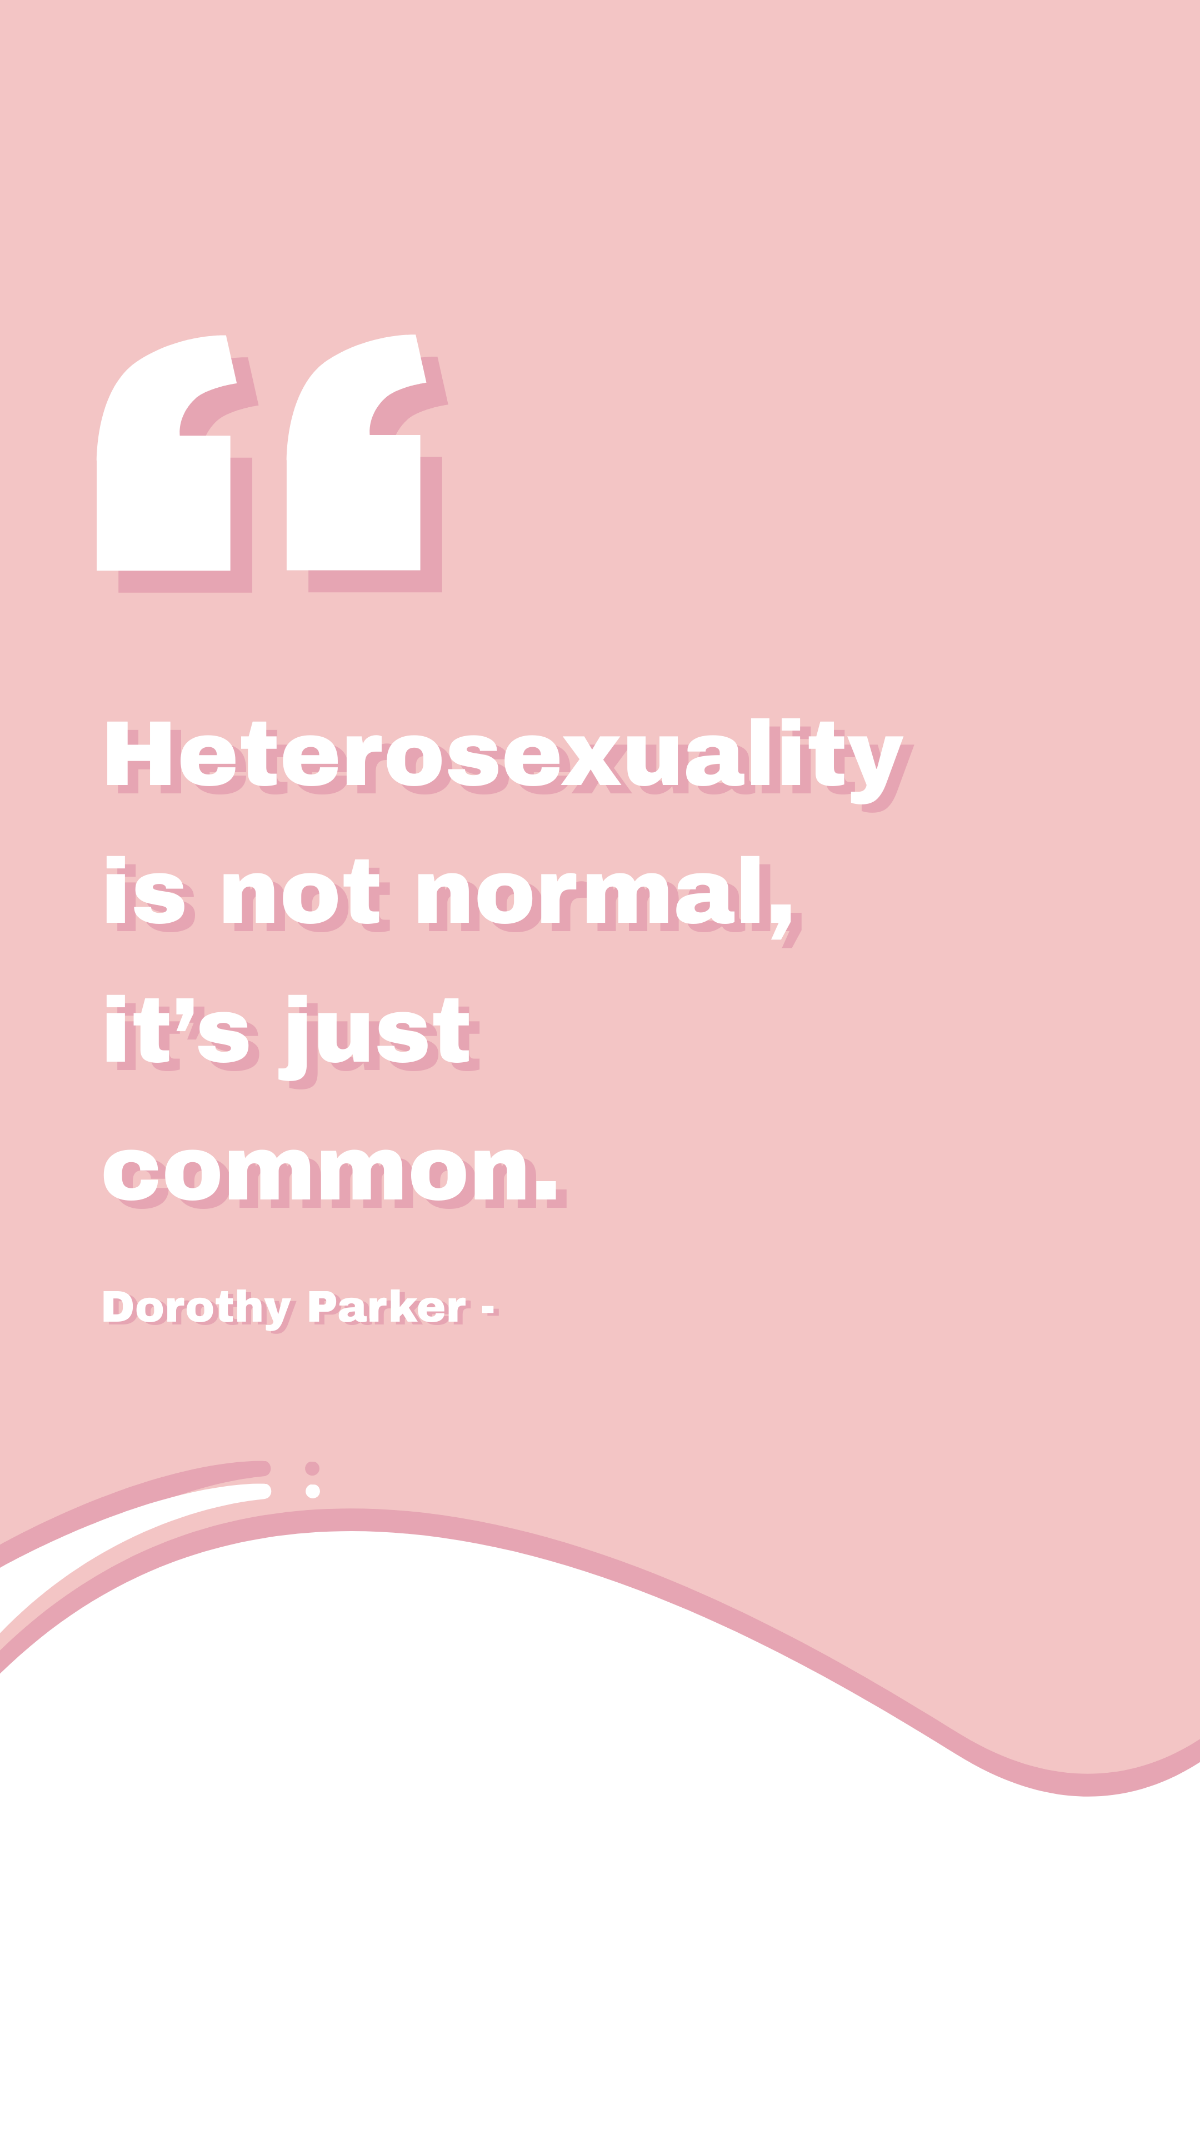 Dorothy Parker - Heterosexuality is not normal, it’s just common. Template